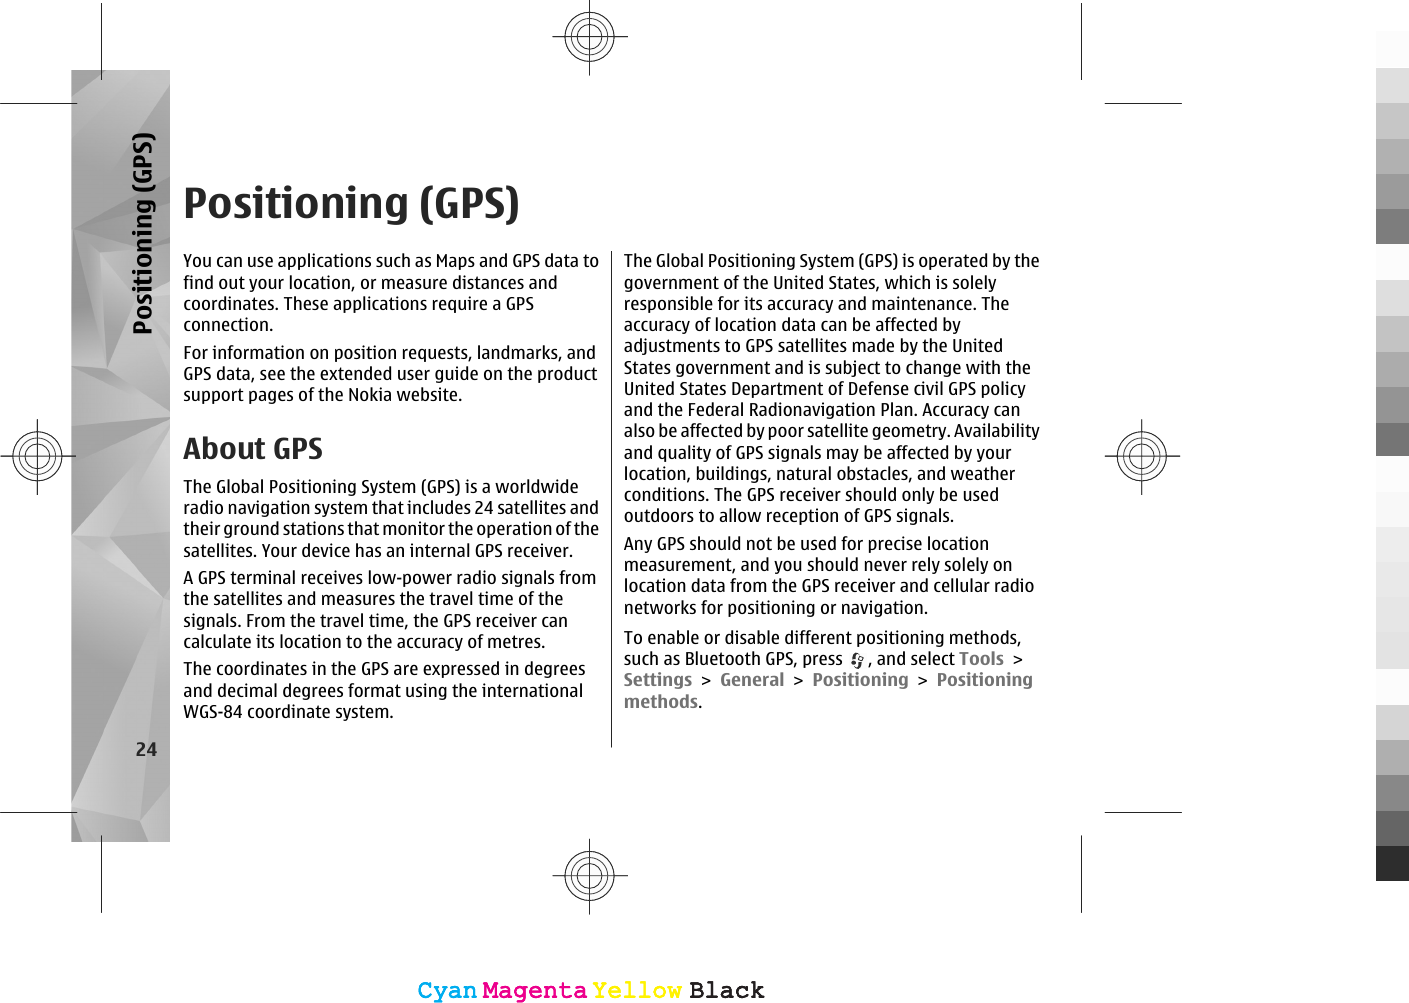 Positioning (GPS)You can use applications such as Maps and GPS data tofind out your location, or measure distances andcoordinates. These applications require a GPSconnection.For information on position requests, landmarks, andGPS data, see the extended user guide on the productsupport pages of the Nokia website.About GPSThe Global Positioning System (GPS) is a worldwideradio navigation system that includes 24 satellites andtheir ground stations that monitor the operation of thesatellites. Your device has an internal GPS receiver.A GPS terminal receives low-power radio signals fromthe satellites and measures the travel time of thesignals. From the travel time, the GPS receiver cancalculate its location to the accuracy of metres.The coordinates in the GPS are expressed in degreesand decimal degrees format using the internationalWGS-84 coordinate system.The Global Positioning System (GPS) is operated by thegovernment of the United States, which is solelyresponsible for its accuracy and maintenance. Theaccuracy of location data can be affected byadjustments to GPS satellites made by the UnitedStates government and is subject to change with theUnited States Department of Defense civil GPS policyand the Federal Radionavigation Plan. Accuracy canalso be affected by poor satellite geometry. Availabilityand quality of GPS signals may be affected by yourlocation, buildings, natural obstacles, and weatherconditions. The GPS receiver should only be usedoutdoors to allow reception of GPS signals.Any GPS should not be used for precise locationmeasurement, and you should never rely solely onlocation data from the GPS receiver and cellular radionetworks for positioning or navigation.To enable or disable different positioning methods,such as Bluetooth GPS, press  , and select Tools &gt;Settings &gt; General &gt; Positioning &gt; Positioningmethods.24Positioning (GPS)CyanCyanMagentaMagentaYellowYellowBlackBlackCyanCyanMagentaMagentaYellowYellowBlackBlack